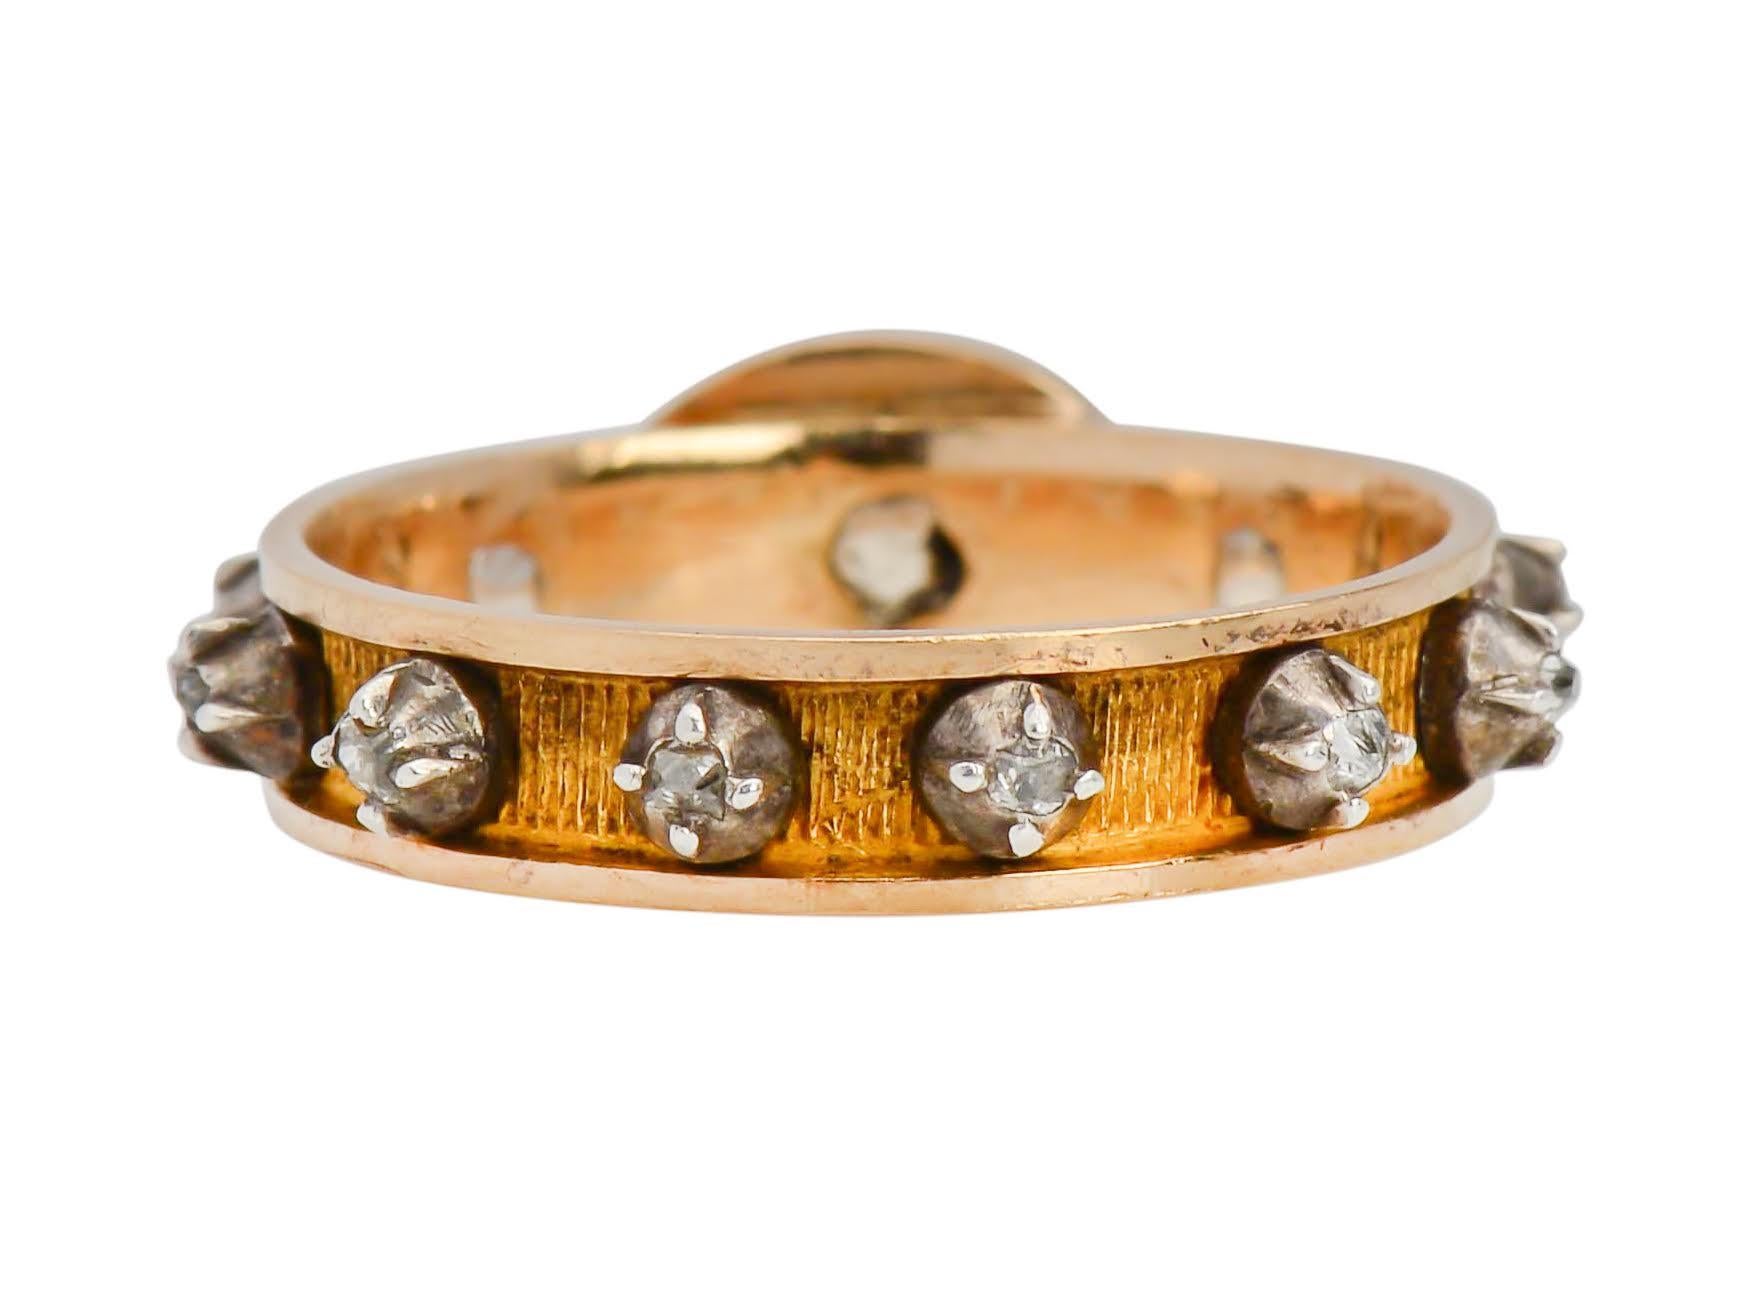 From Ancient times religious rings such as this Georgian Diamond Decade or Rosary Ring have been worn for prayer. This gold ring with a diamond cross on the face is a rare Georgian example.  it is made in 10k yellow gold and diamonds with ten small